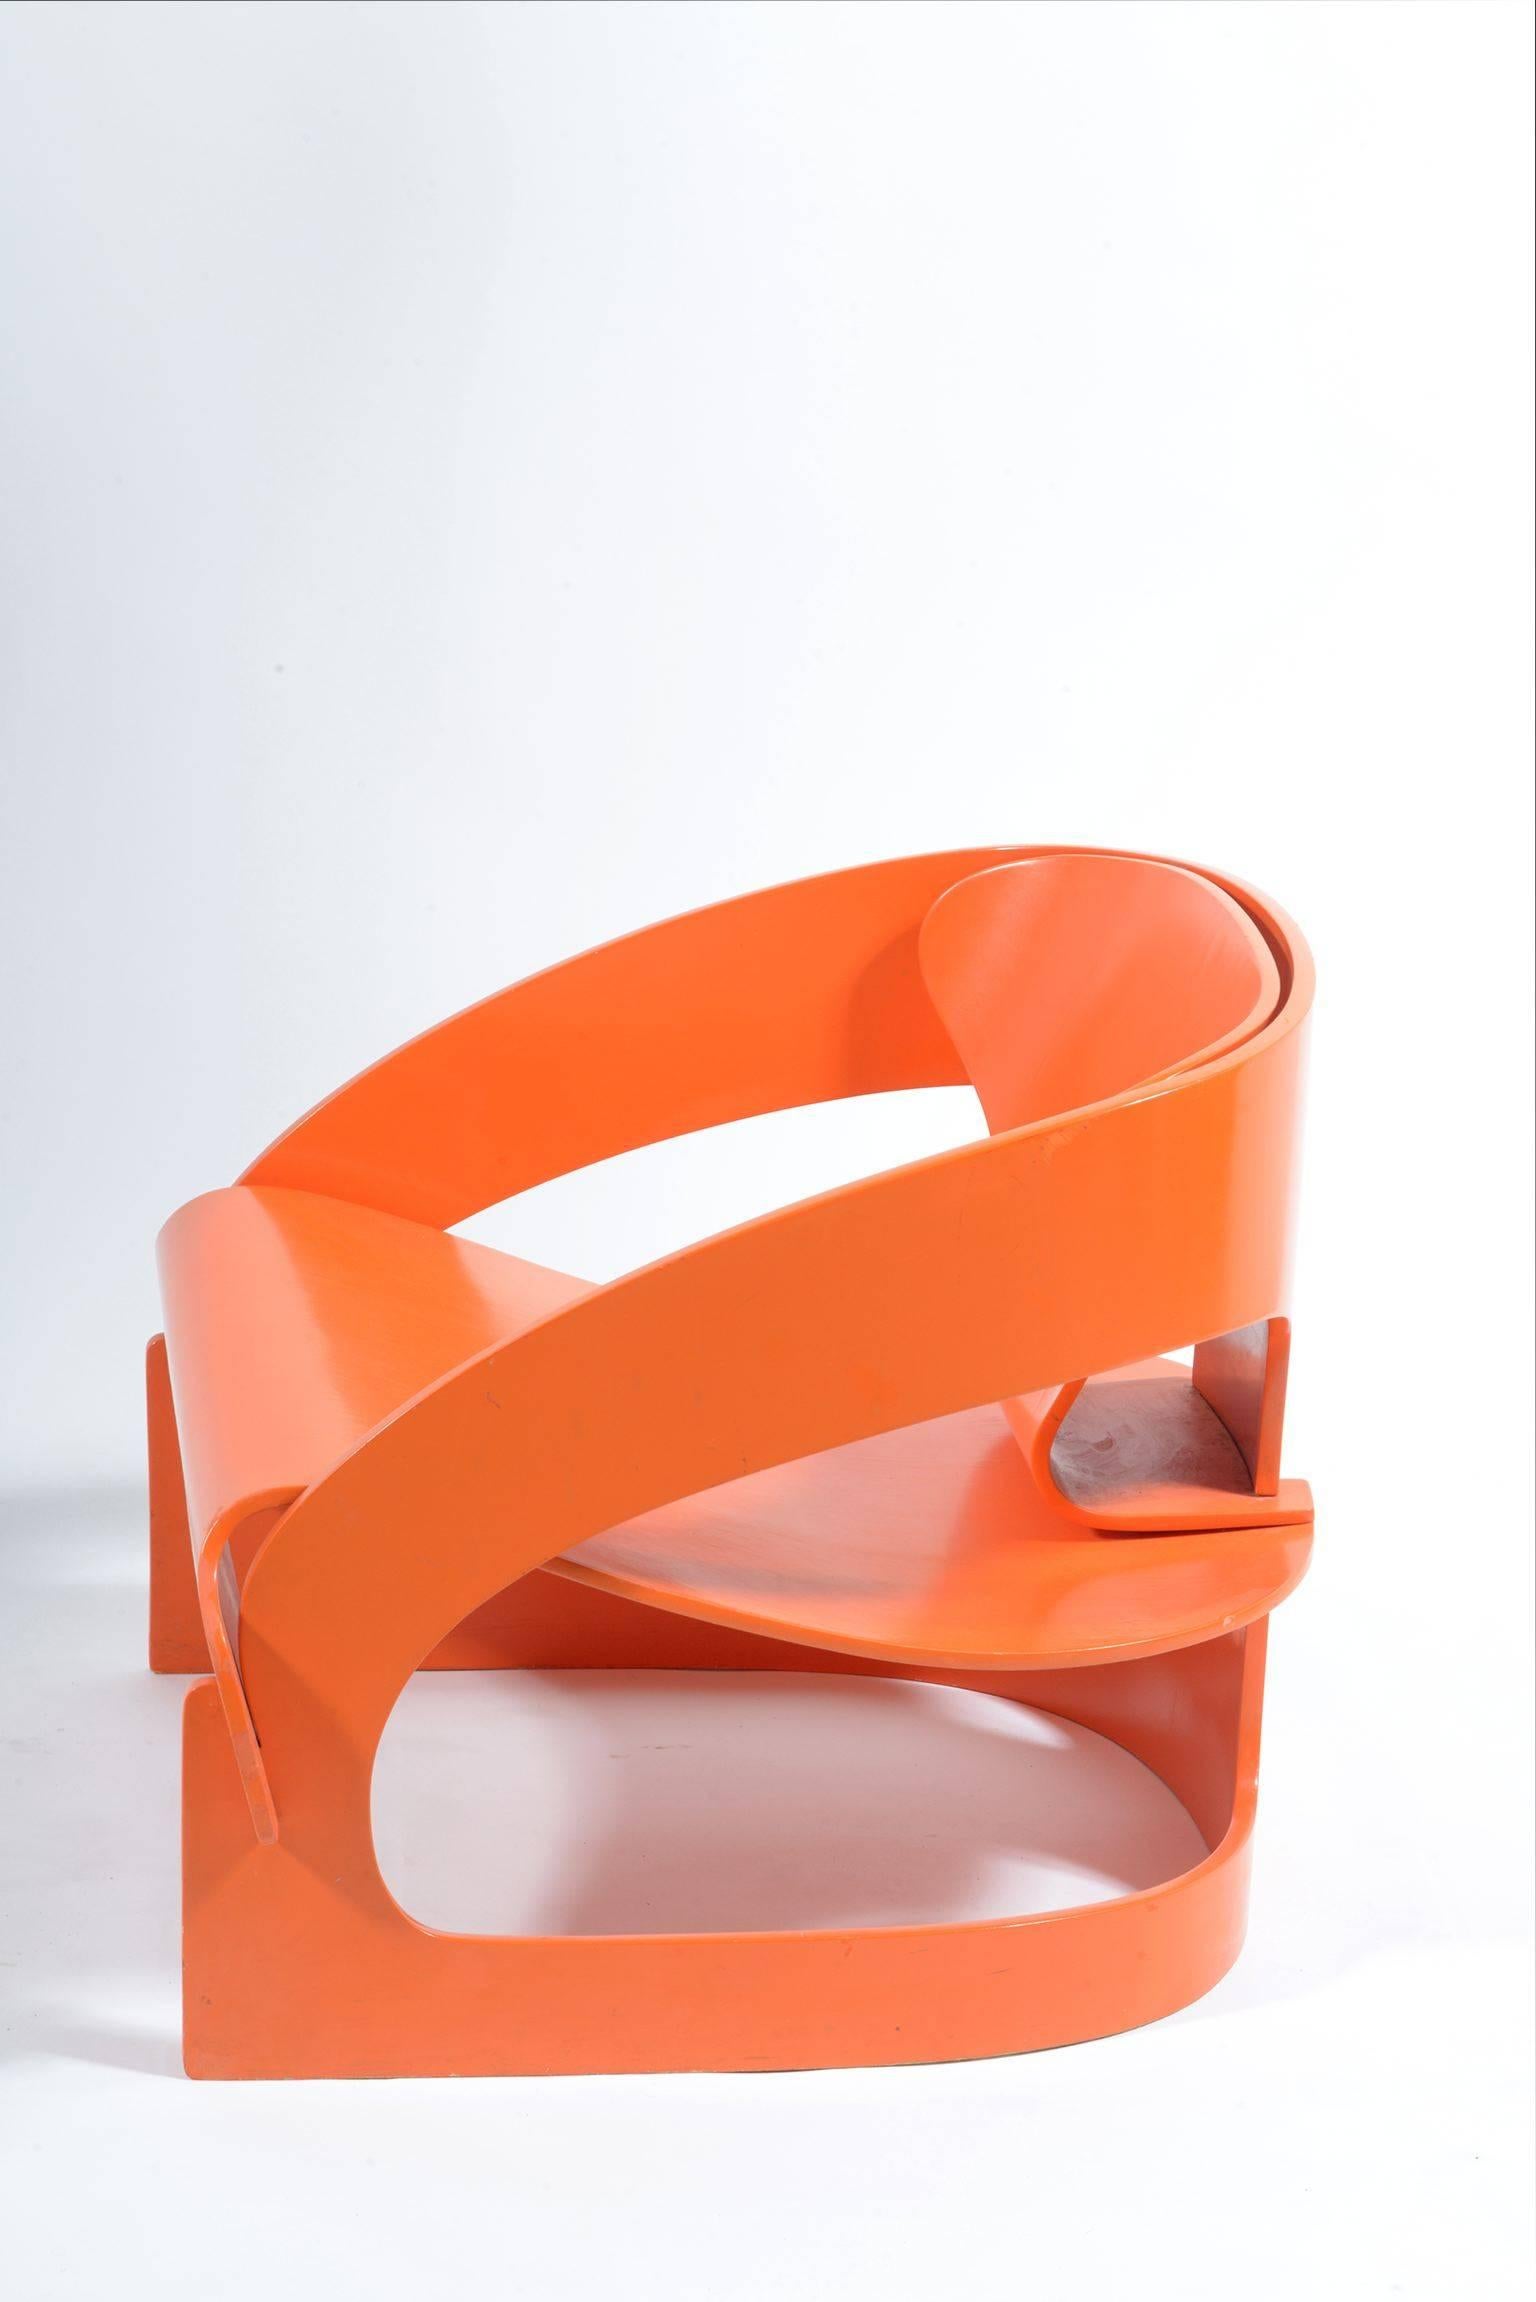 Iconic Mid-Century Orange Armchair by Joe Colombo for Kartell In Excellent Condition In Firenze, Toscana